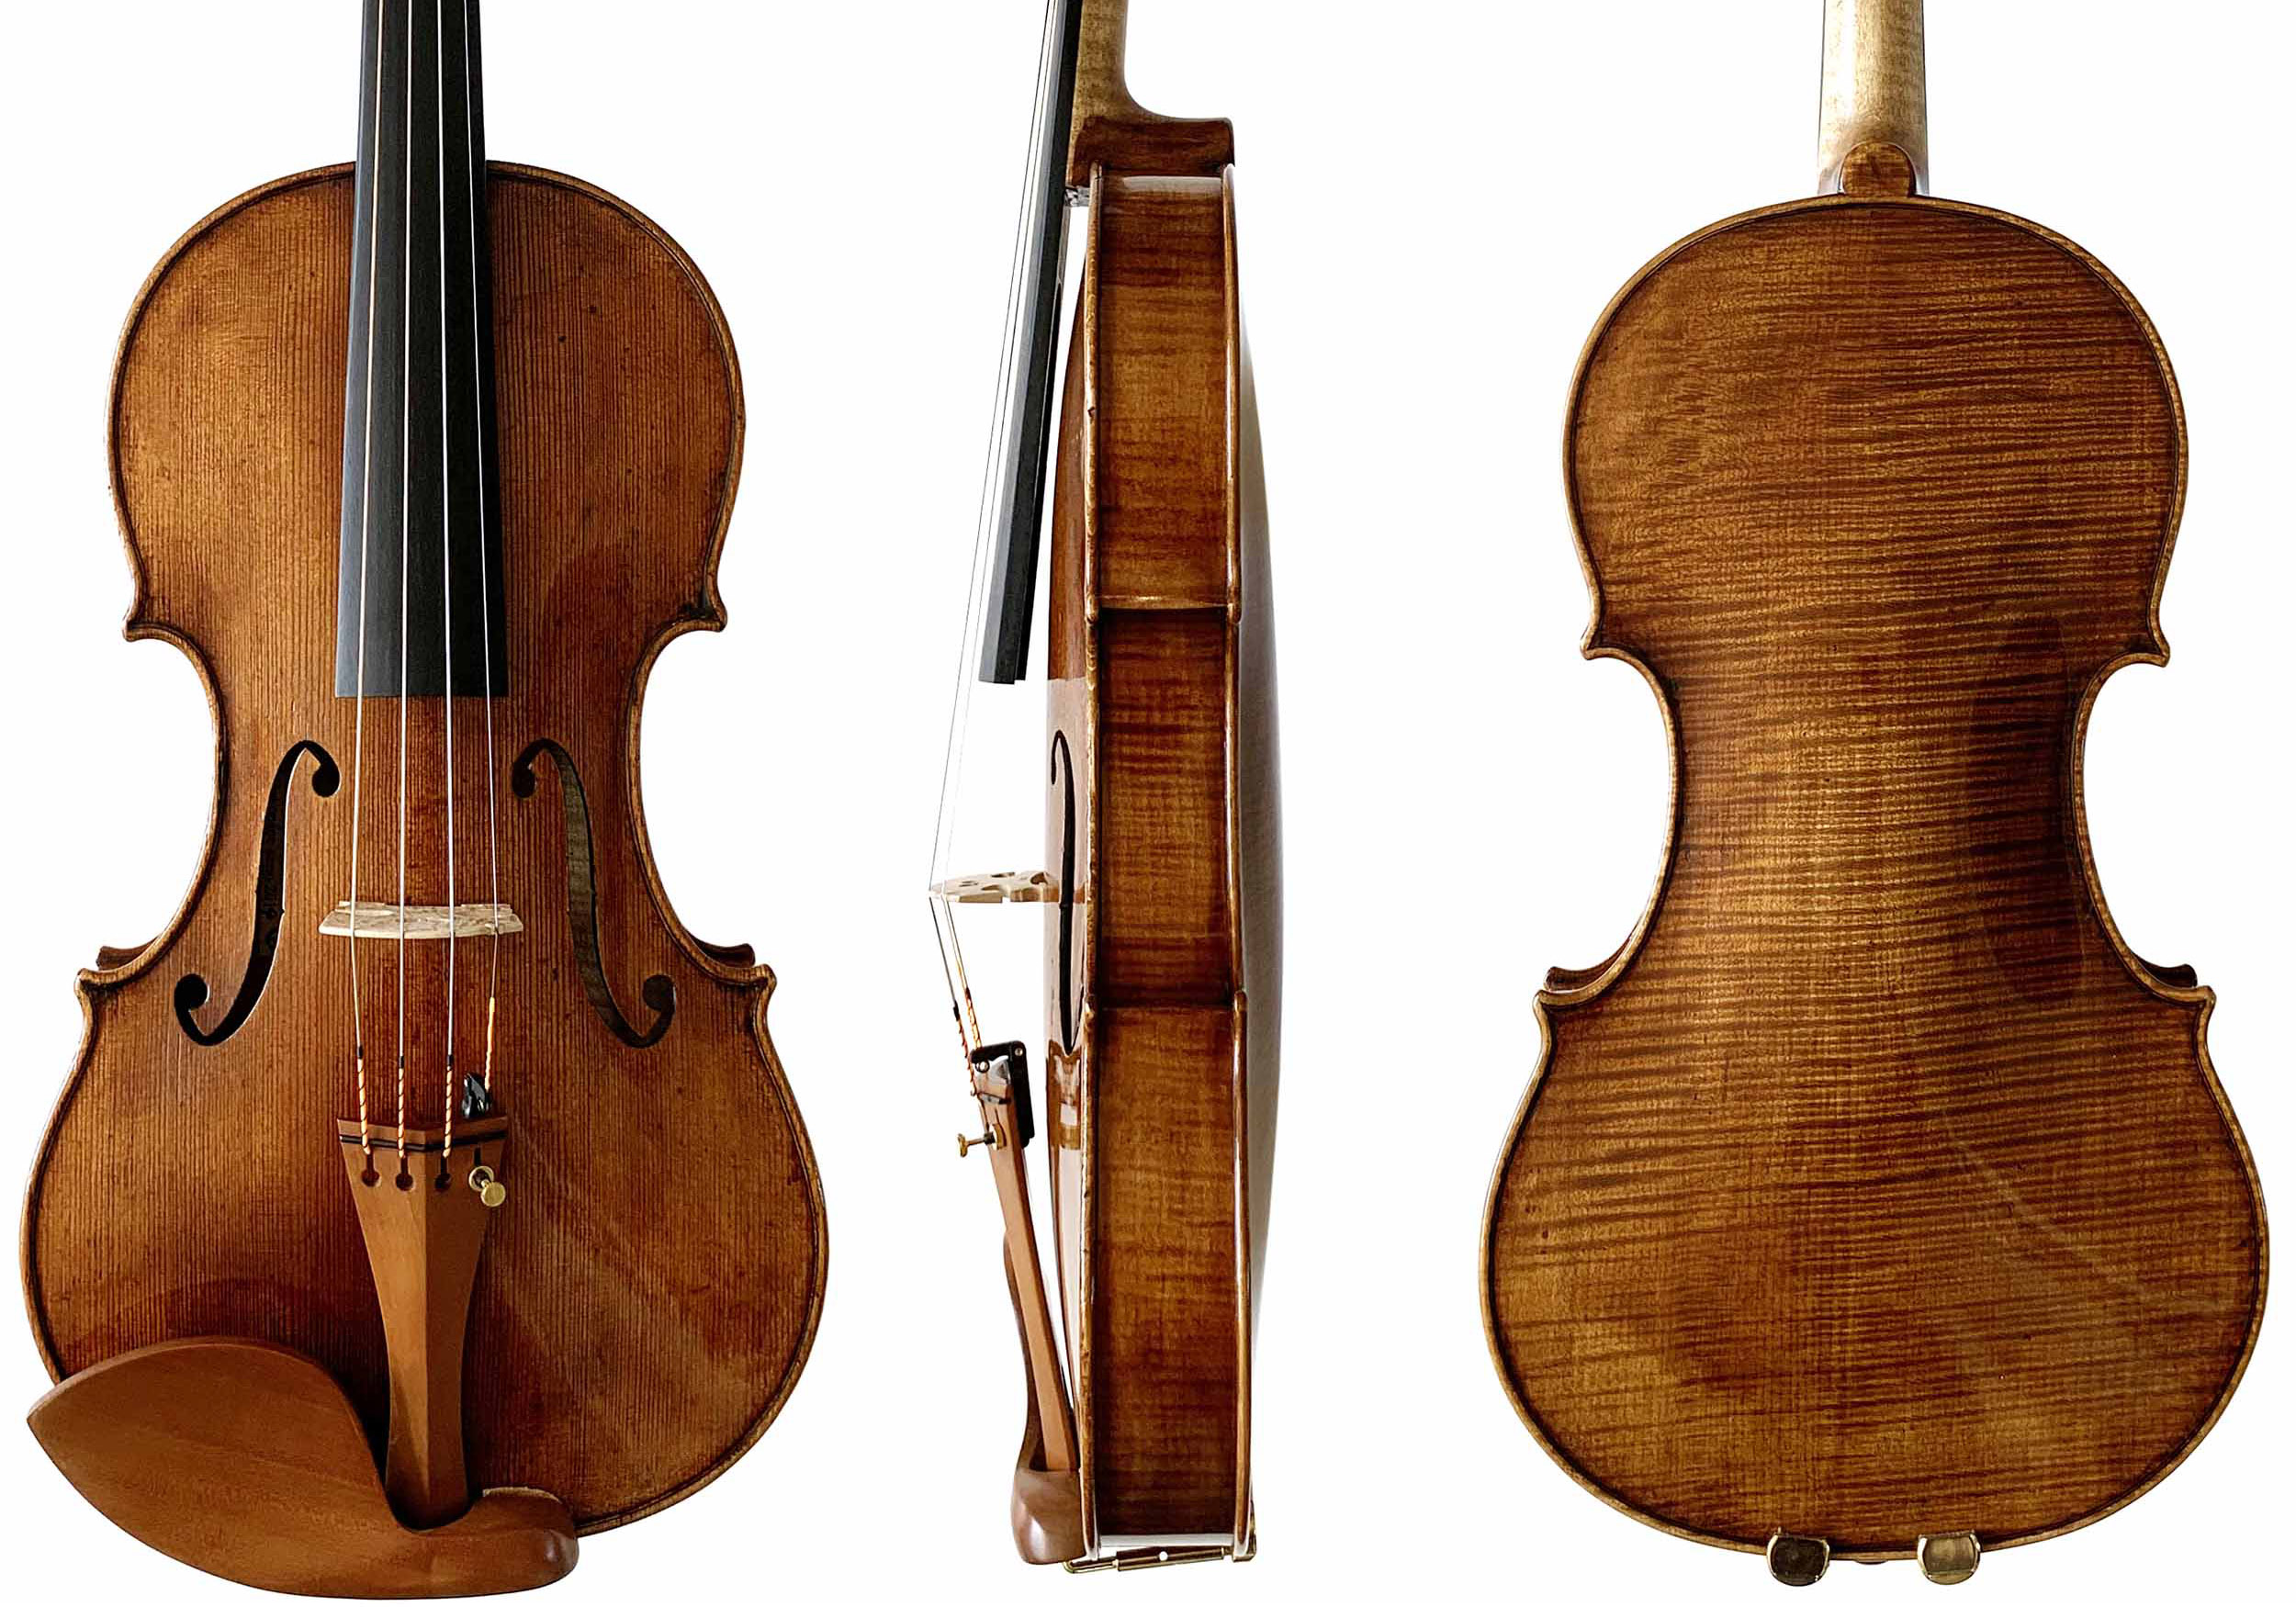 Topa violin front, side and back